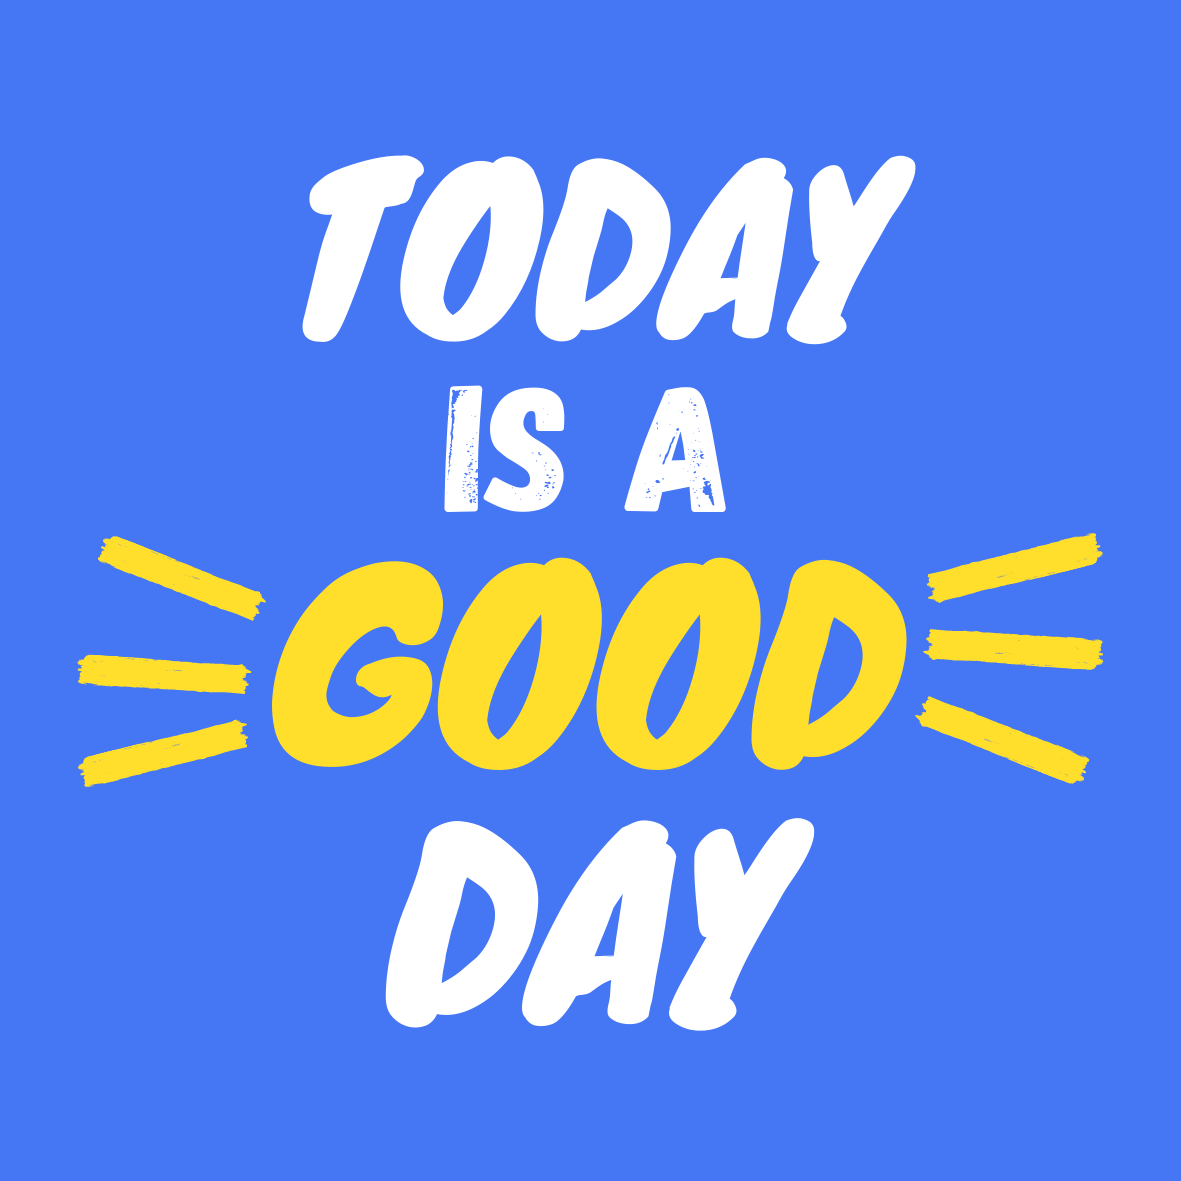 Today Is A Good Day Sticker